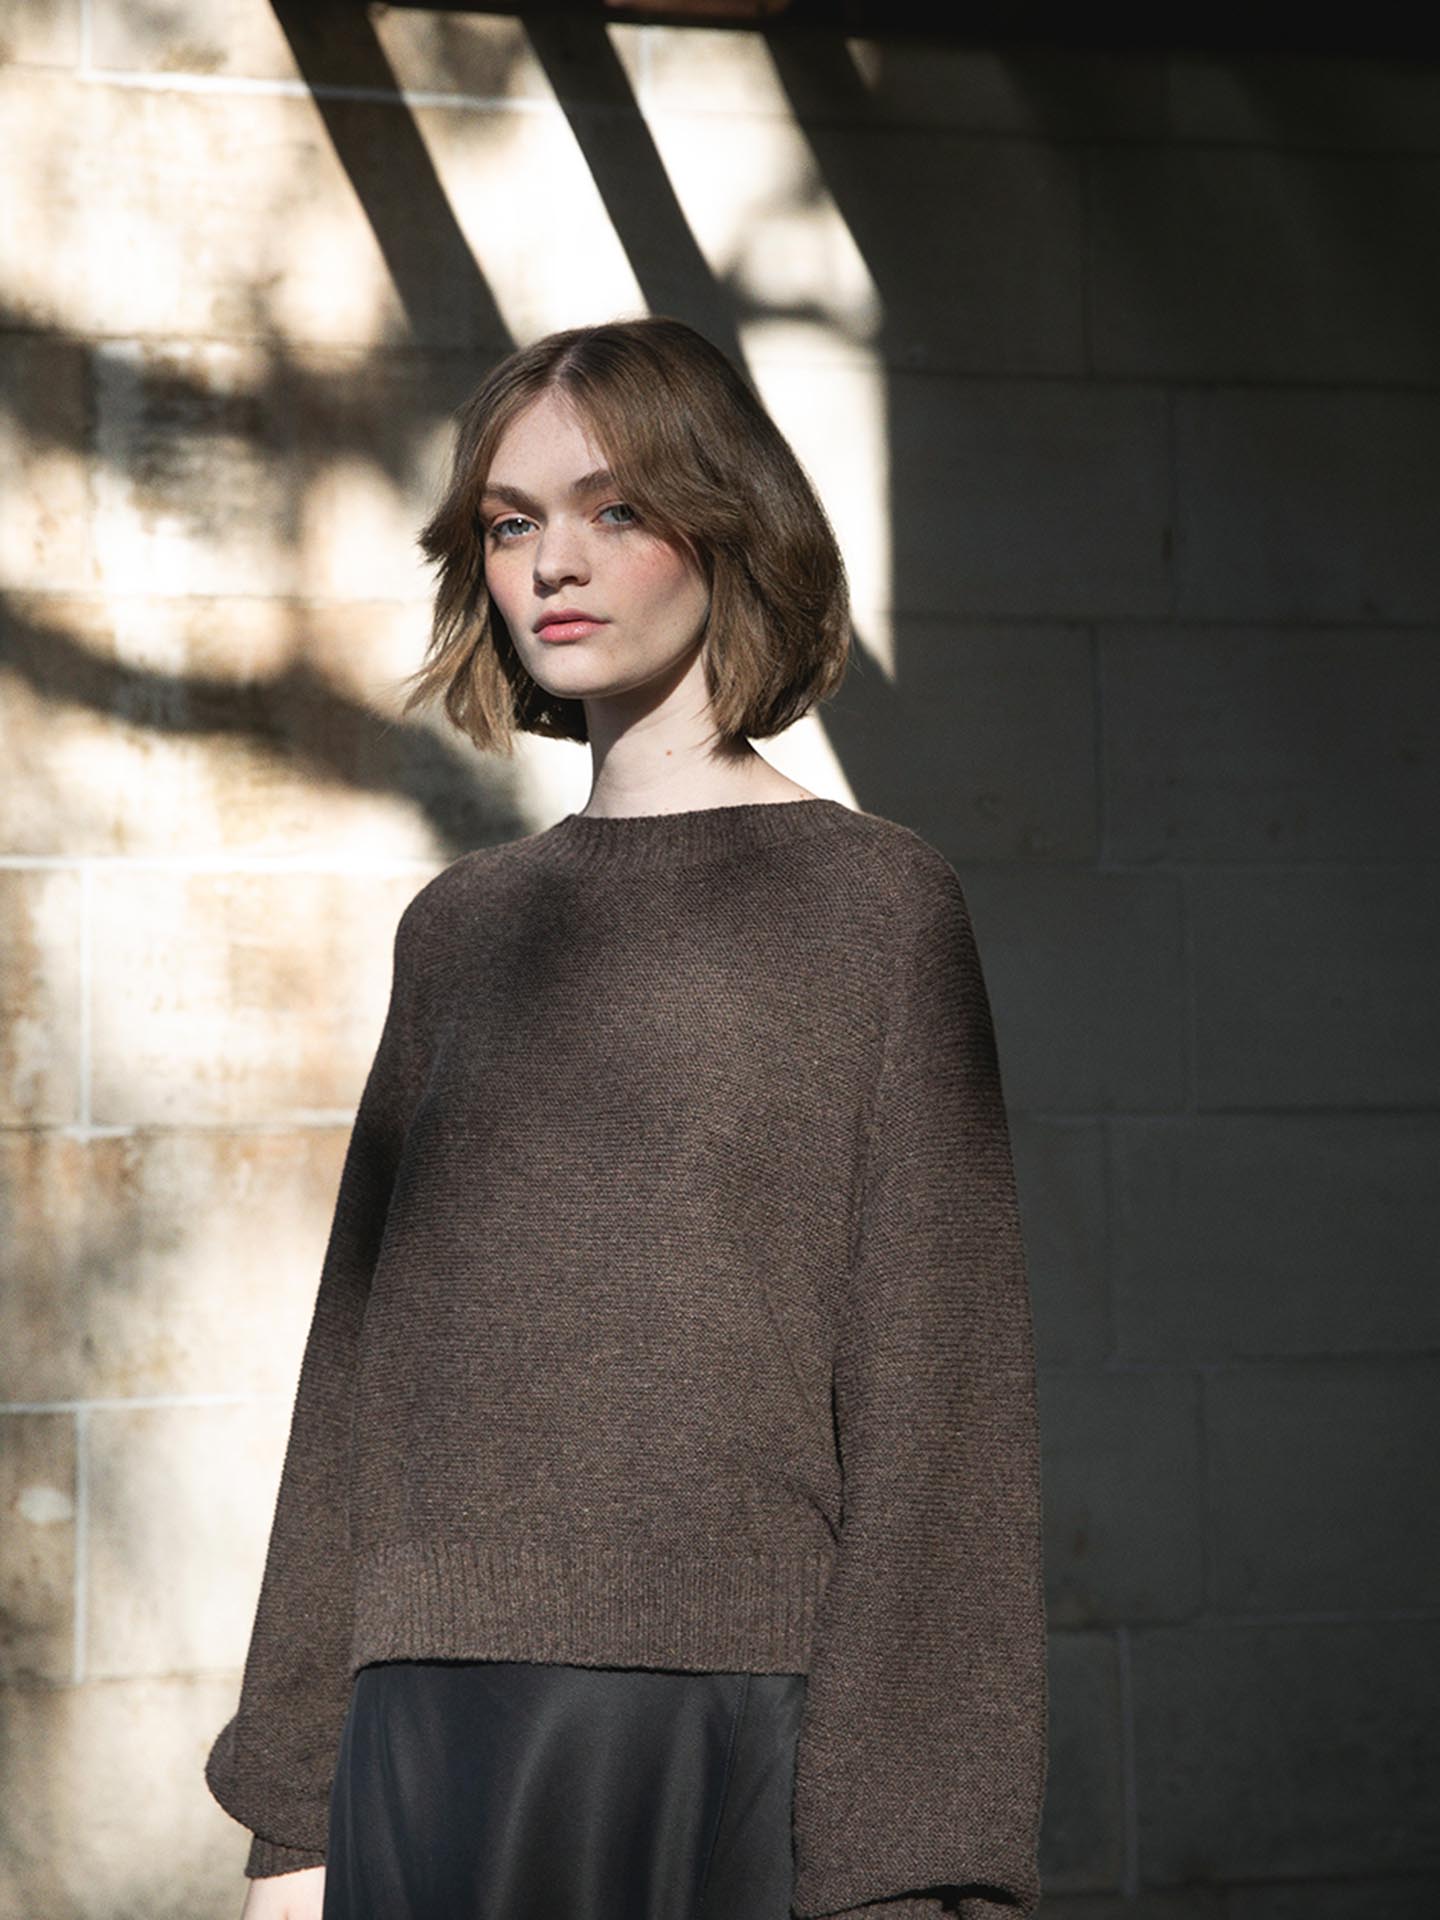 A woman wearing an oversized Francie Poet Knit - Truffle sweater and black skirt.